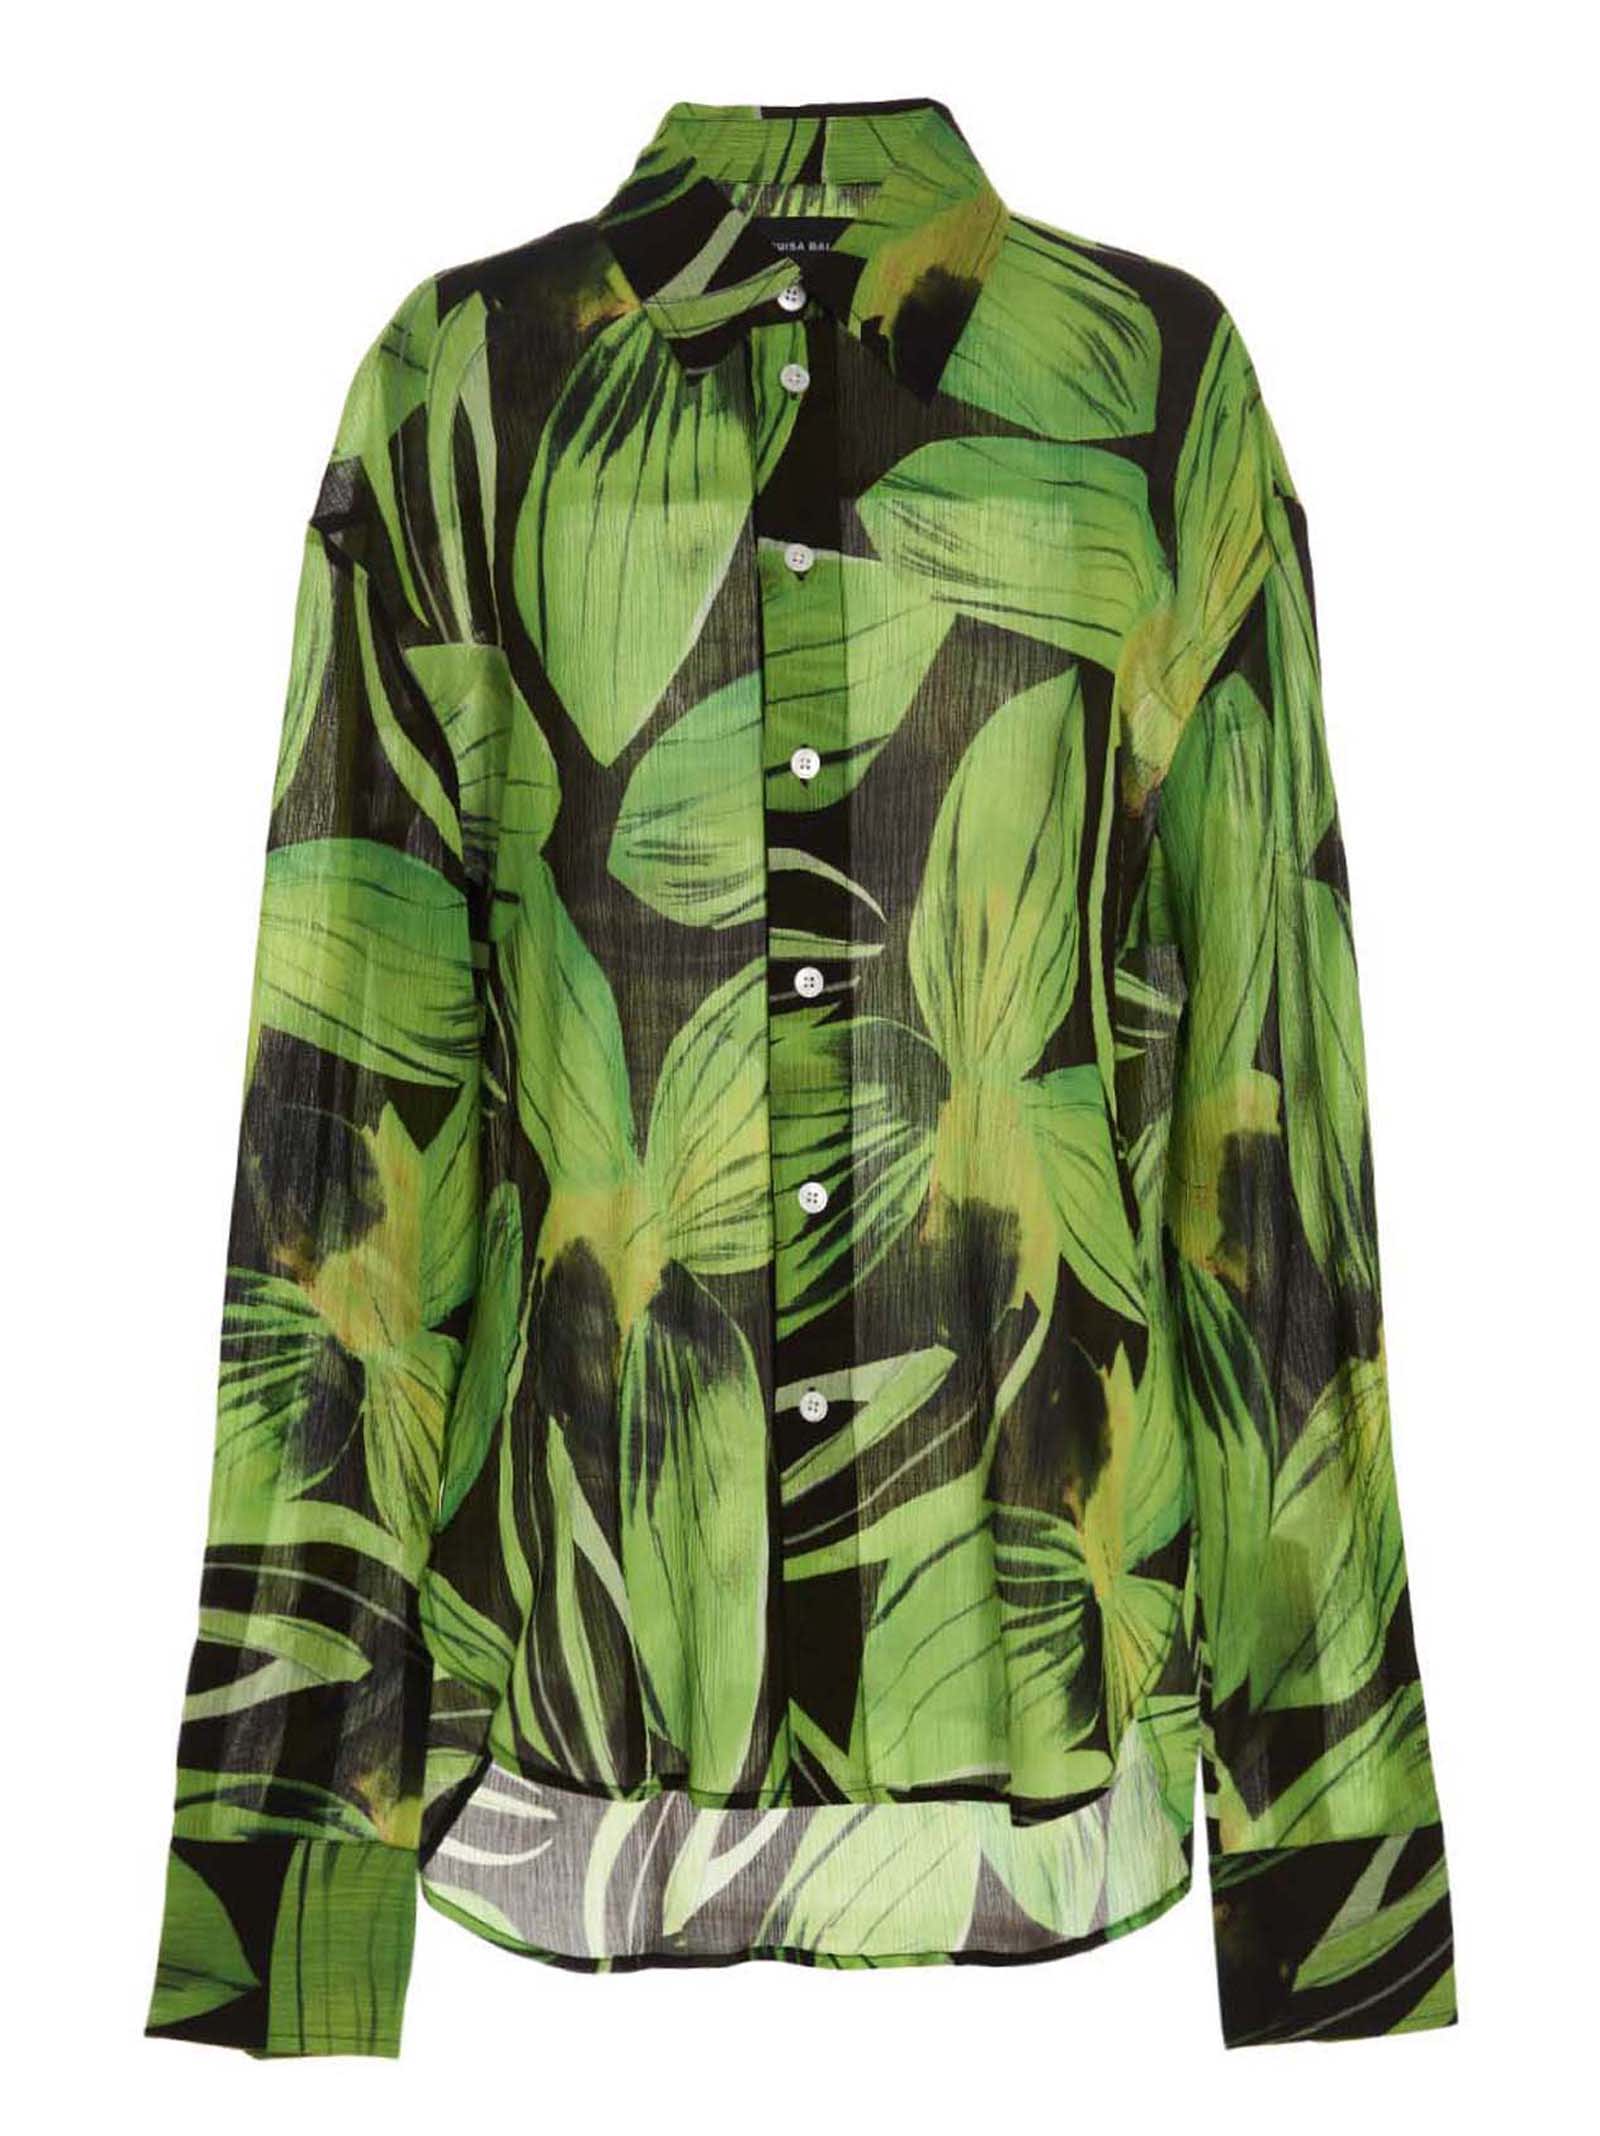 Oversize Shirt With A Print.